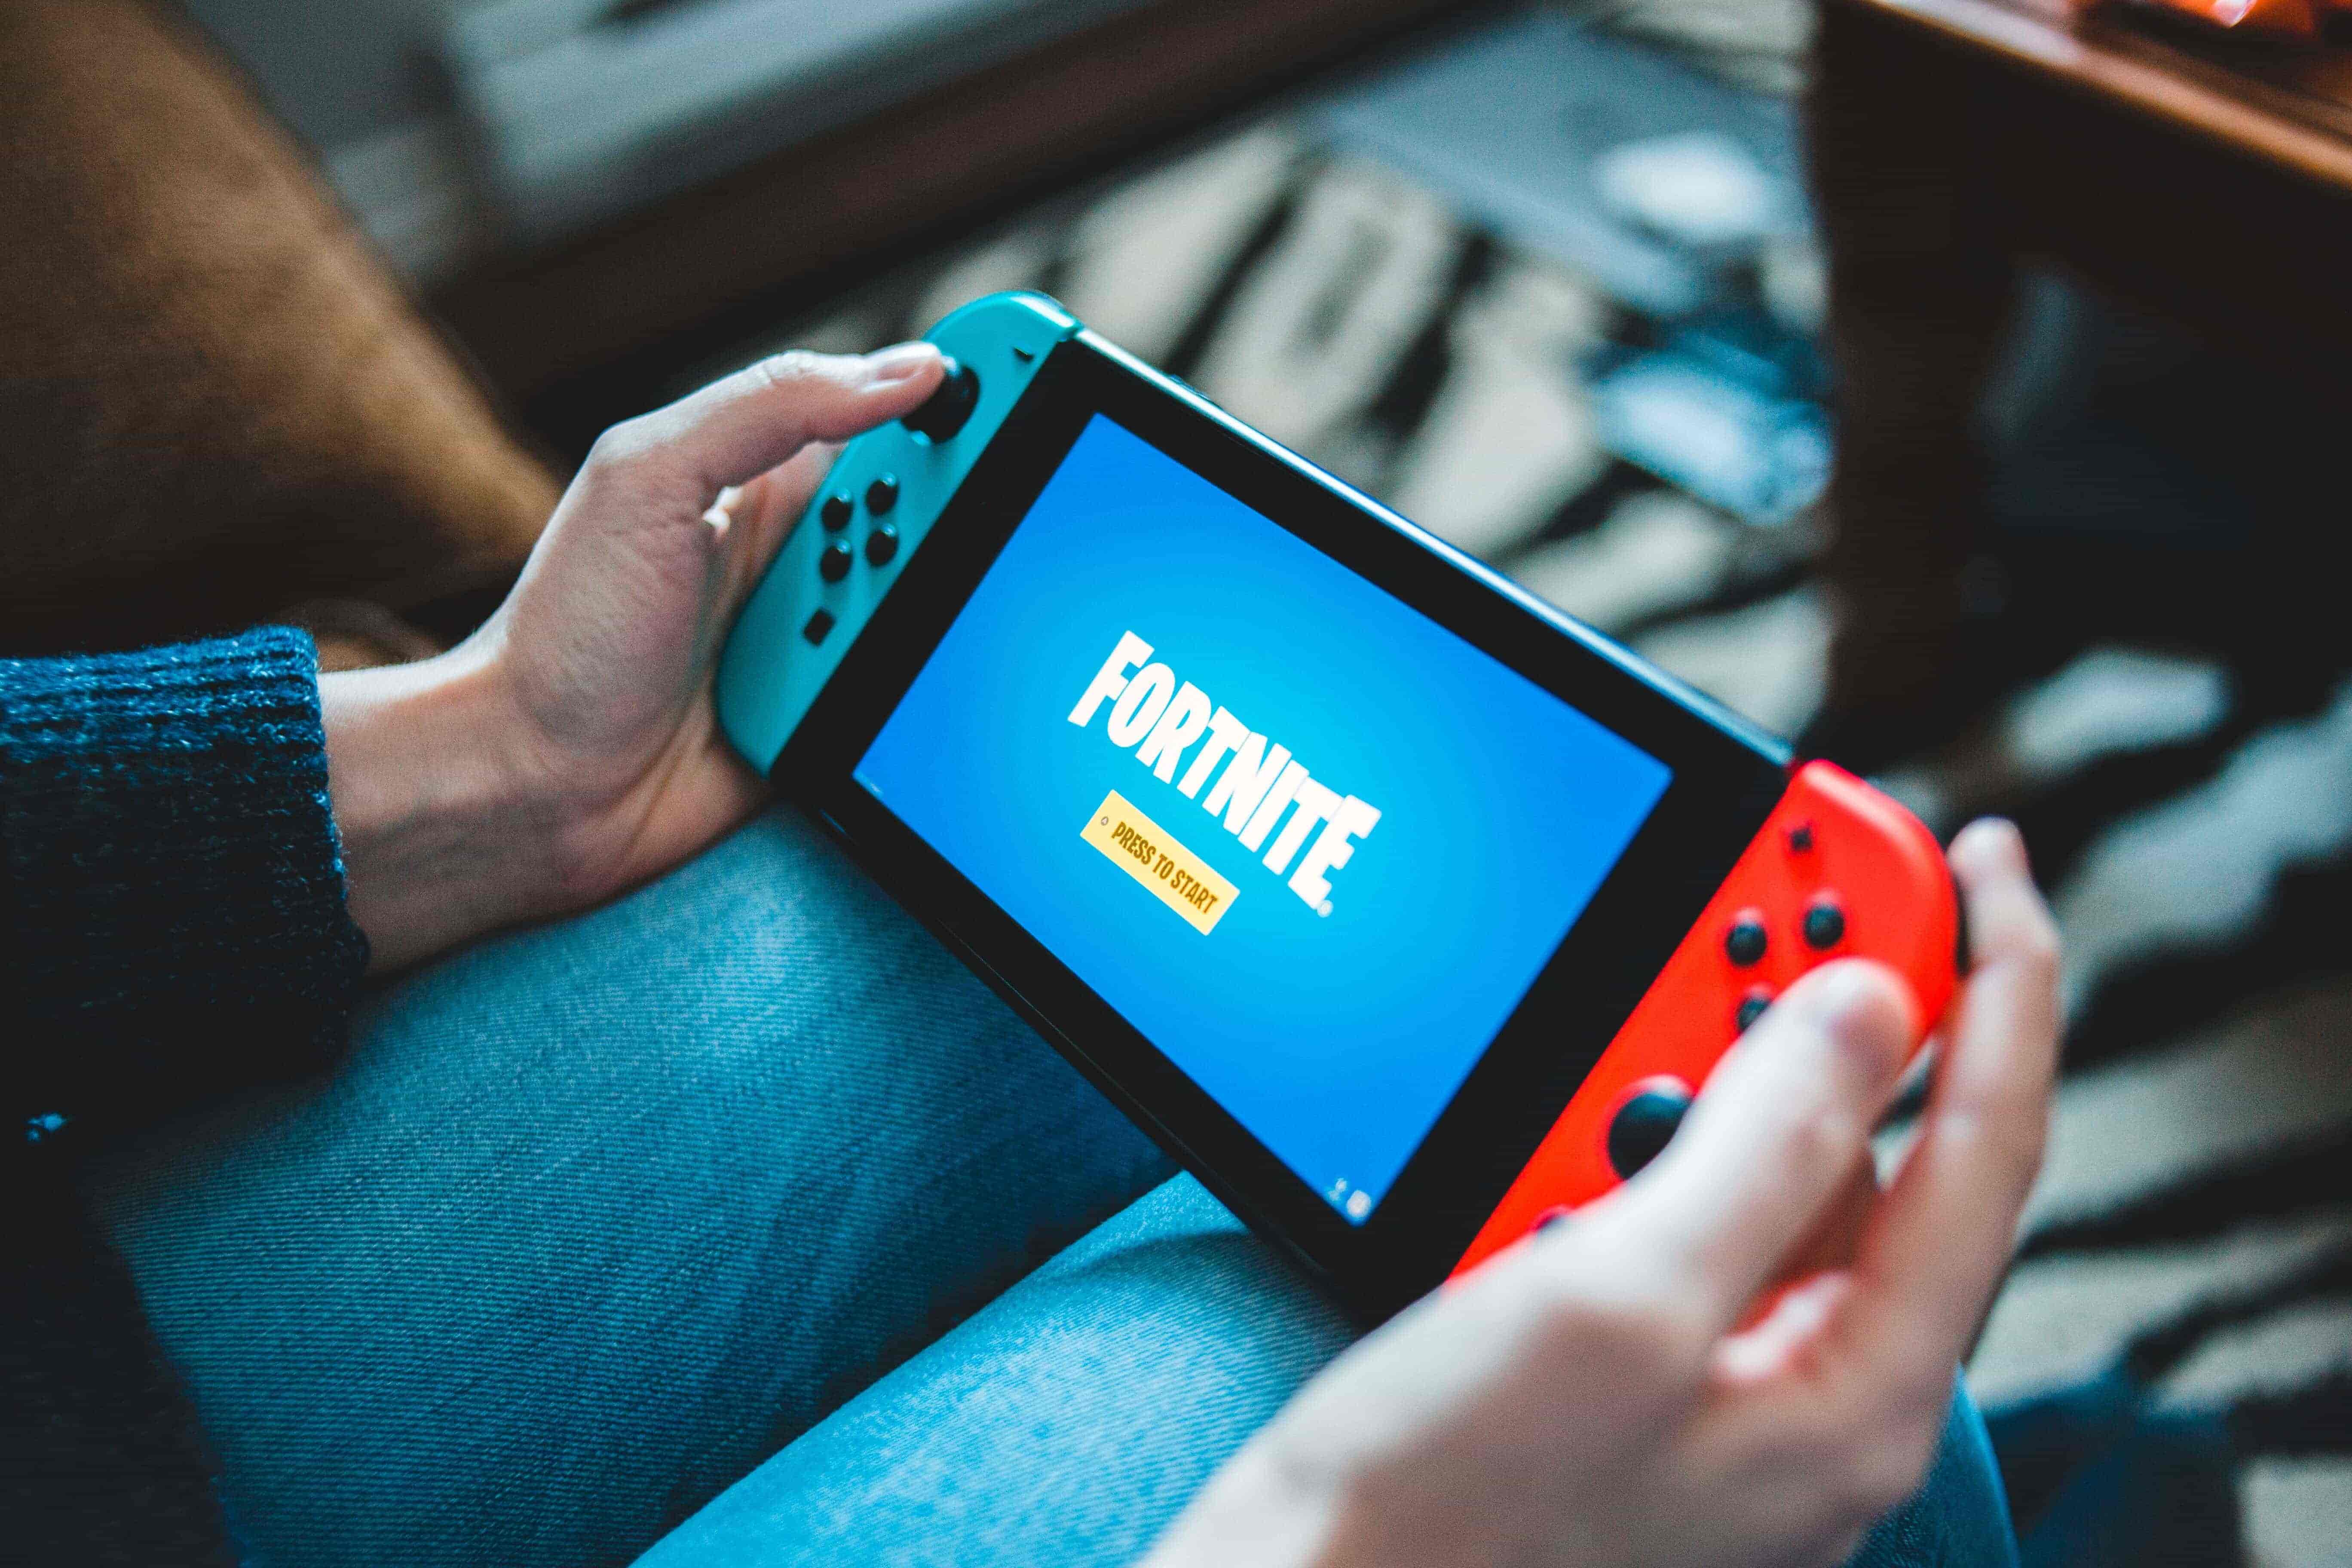 Fortnite being played on Nintendo Switch